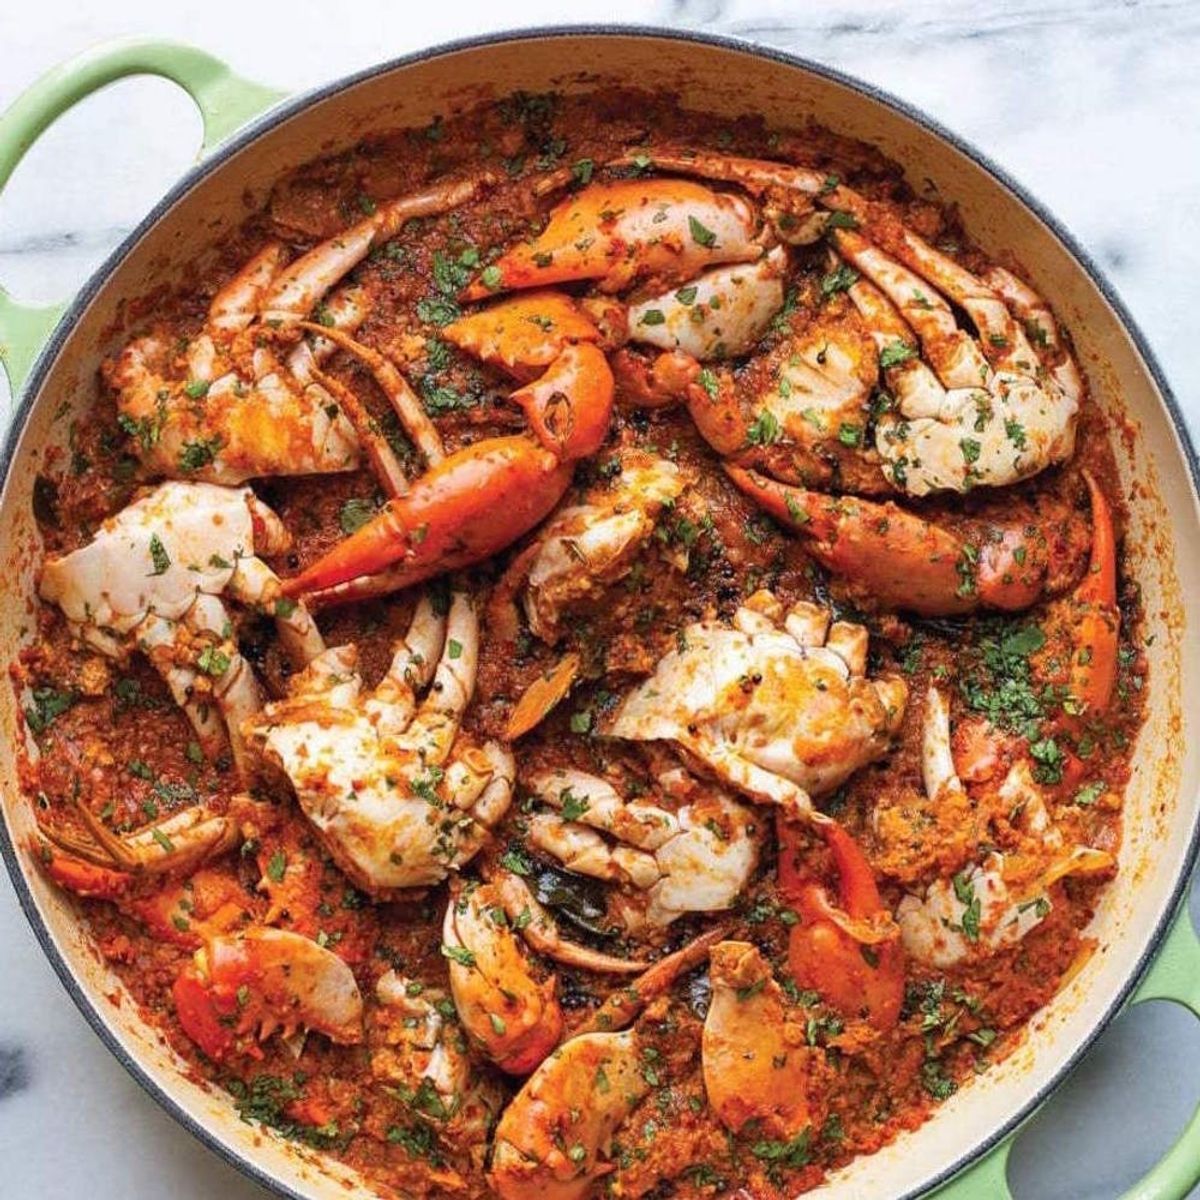 Get Crabby for Dinner With These 14 Crab Recipes